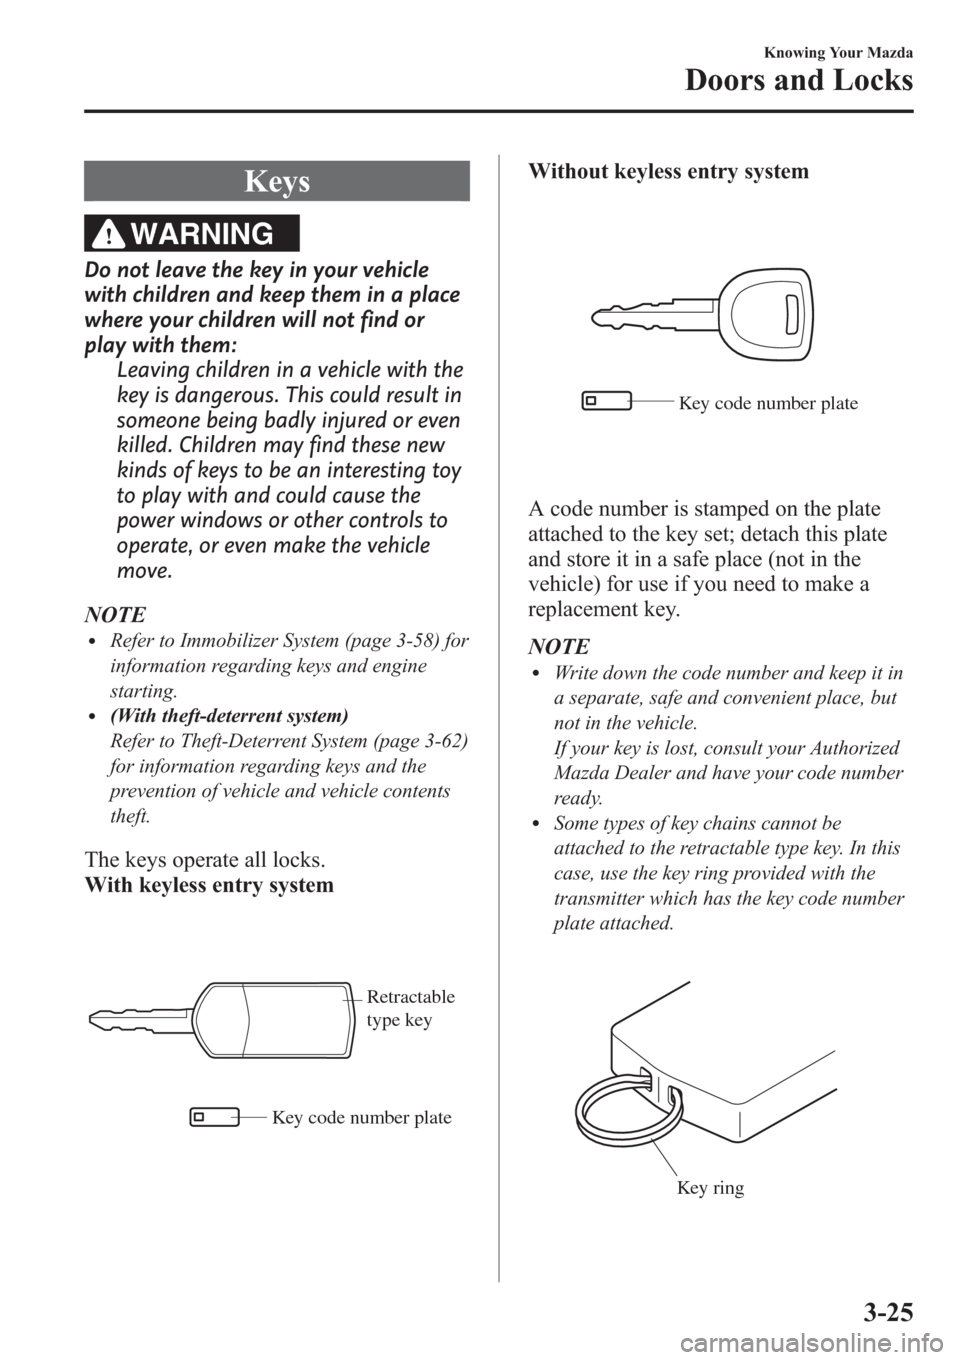 MAZDA MODEL 3 HATCHBACK 2013  Owners Manual (in English) Keys
WARNING
Do not leave the key in your vehicle
with children and keep them in a place
where your children will not find or
play with them:
Leaving children in a vehicle with the
key is dangerous. T